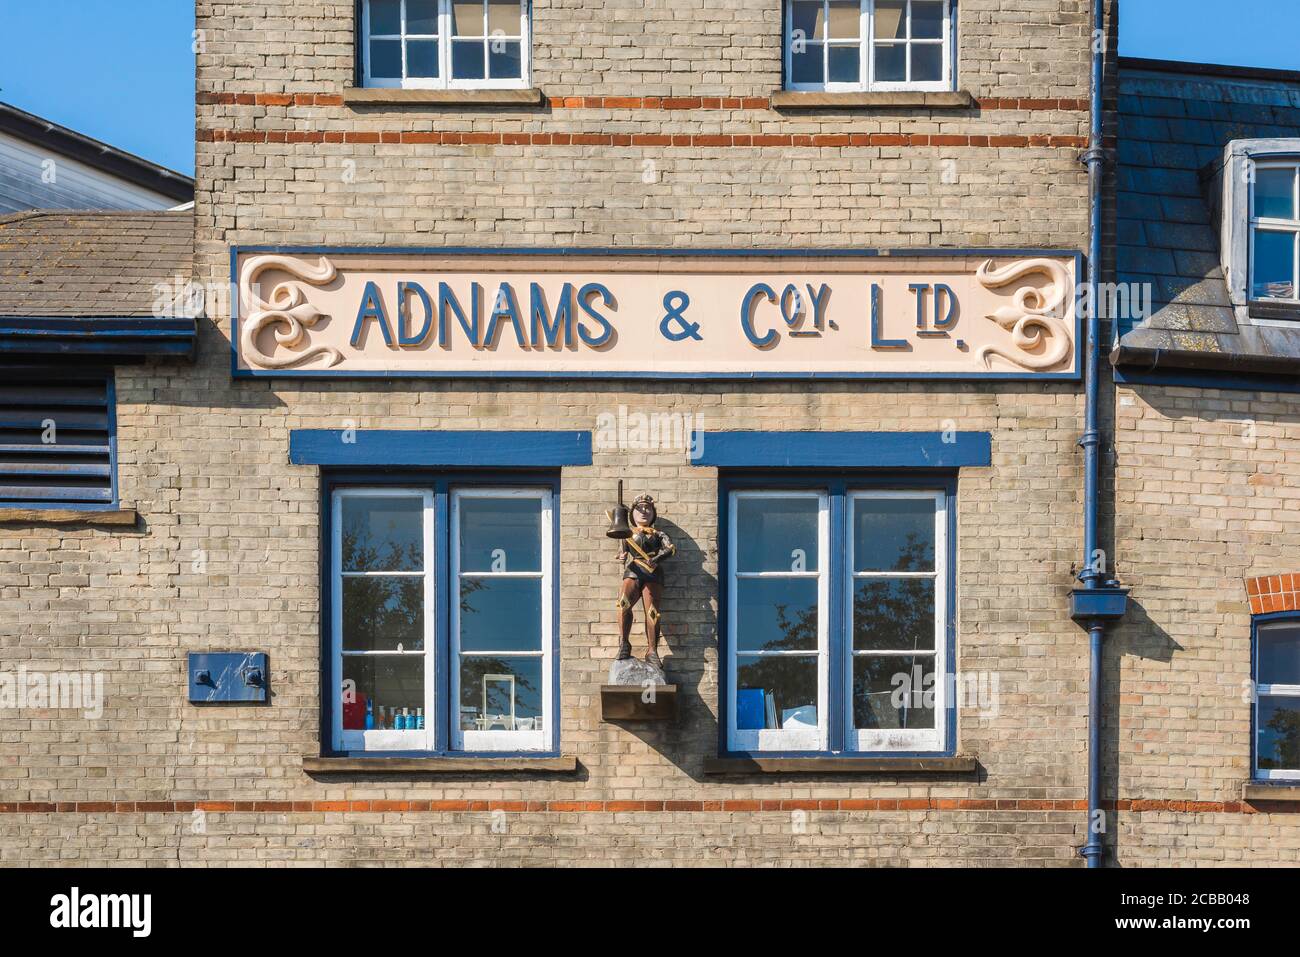 Adnams Southwold, view of detail of the facade of the Adnams Sole Bay Brewery building in the centre of Southwold, East Anglia, England, UK Stock Photo